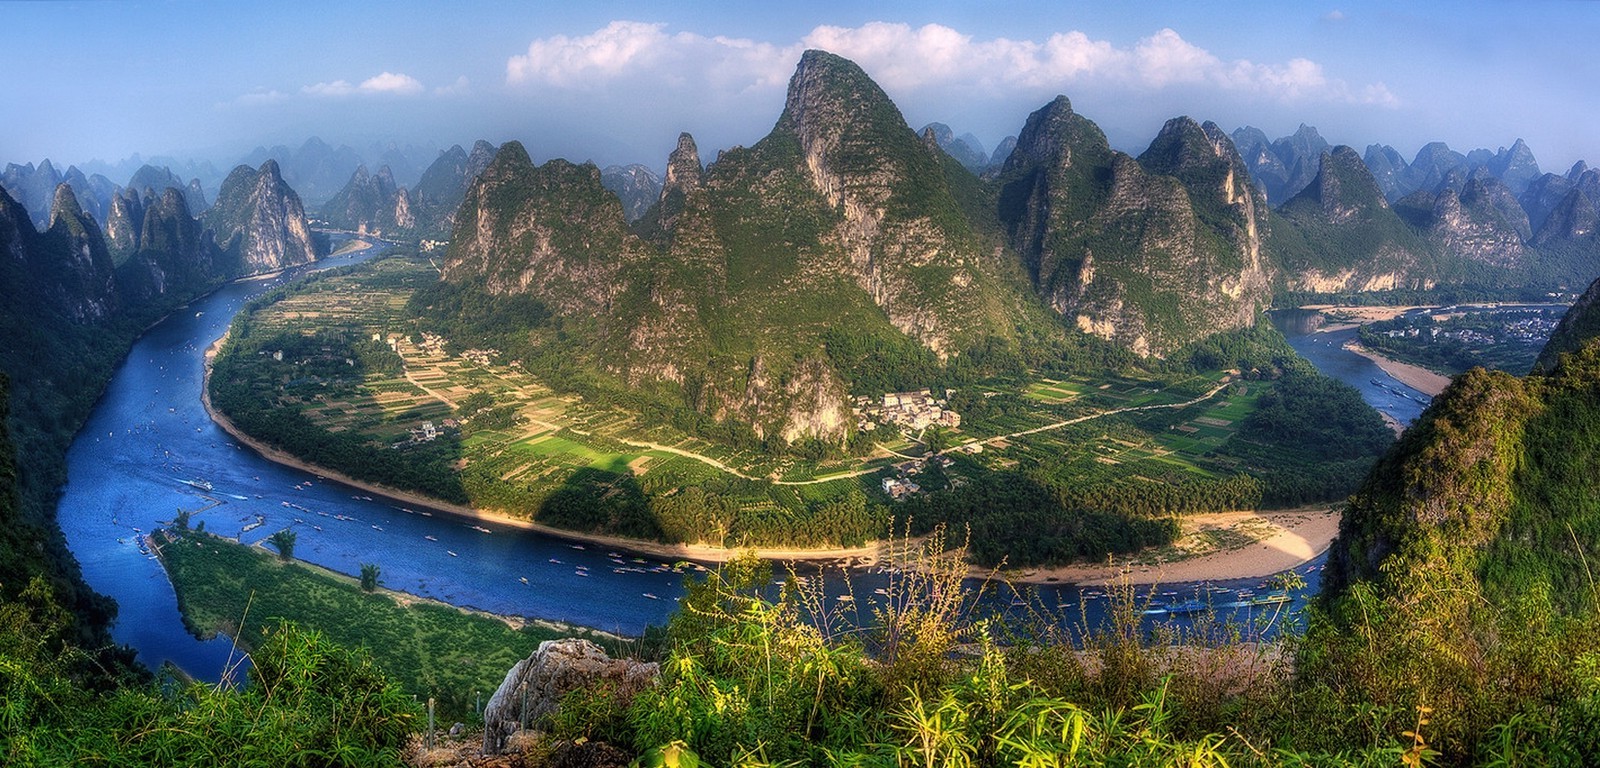 panoramas, River, Mountain, Villages, China, Field, Road, Boat, Nature, Landscape, Shrubs, Clouds, Sunset, Water, Blue, Green Wallpaper